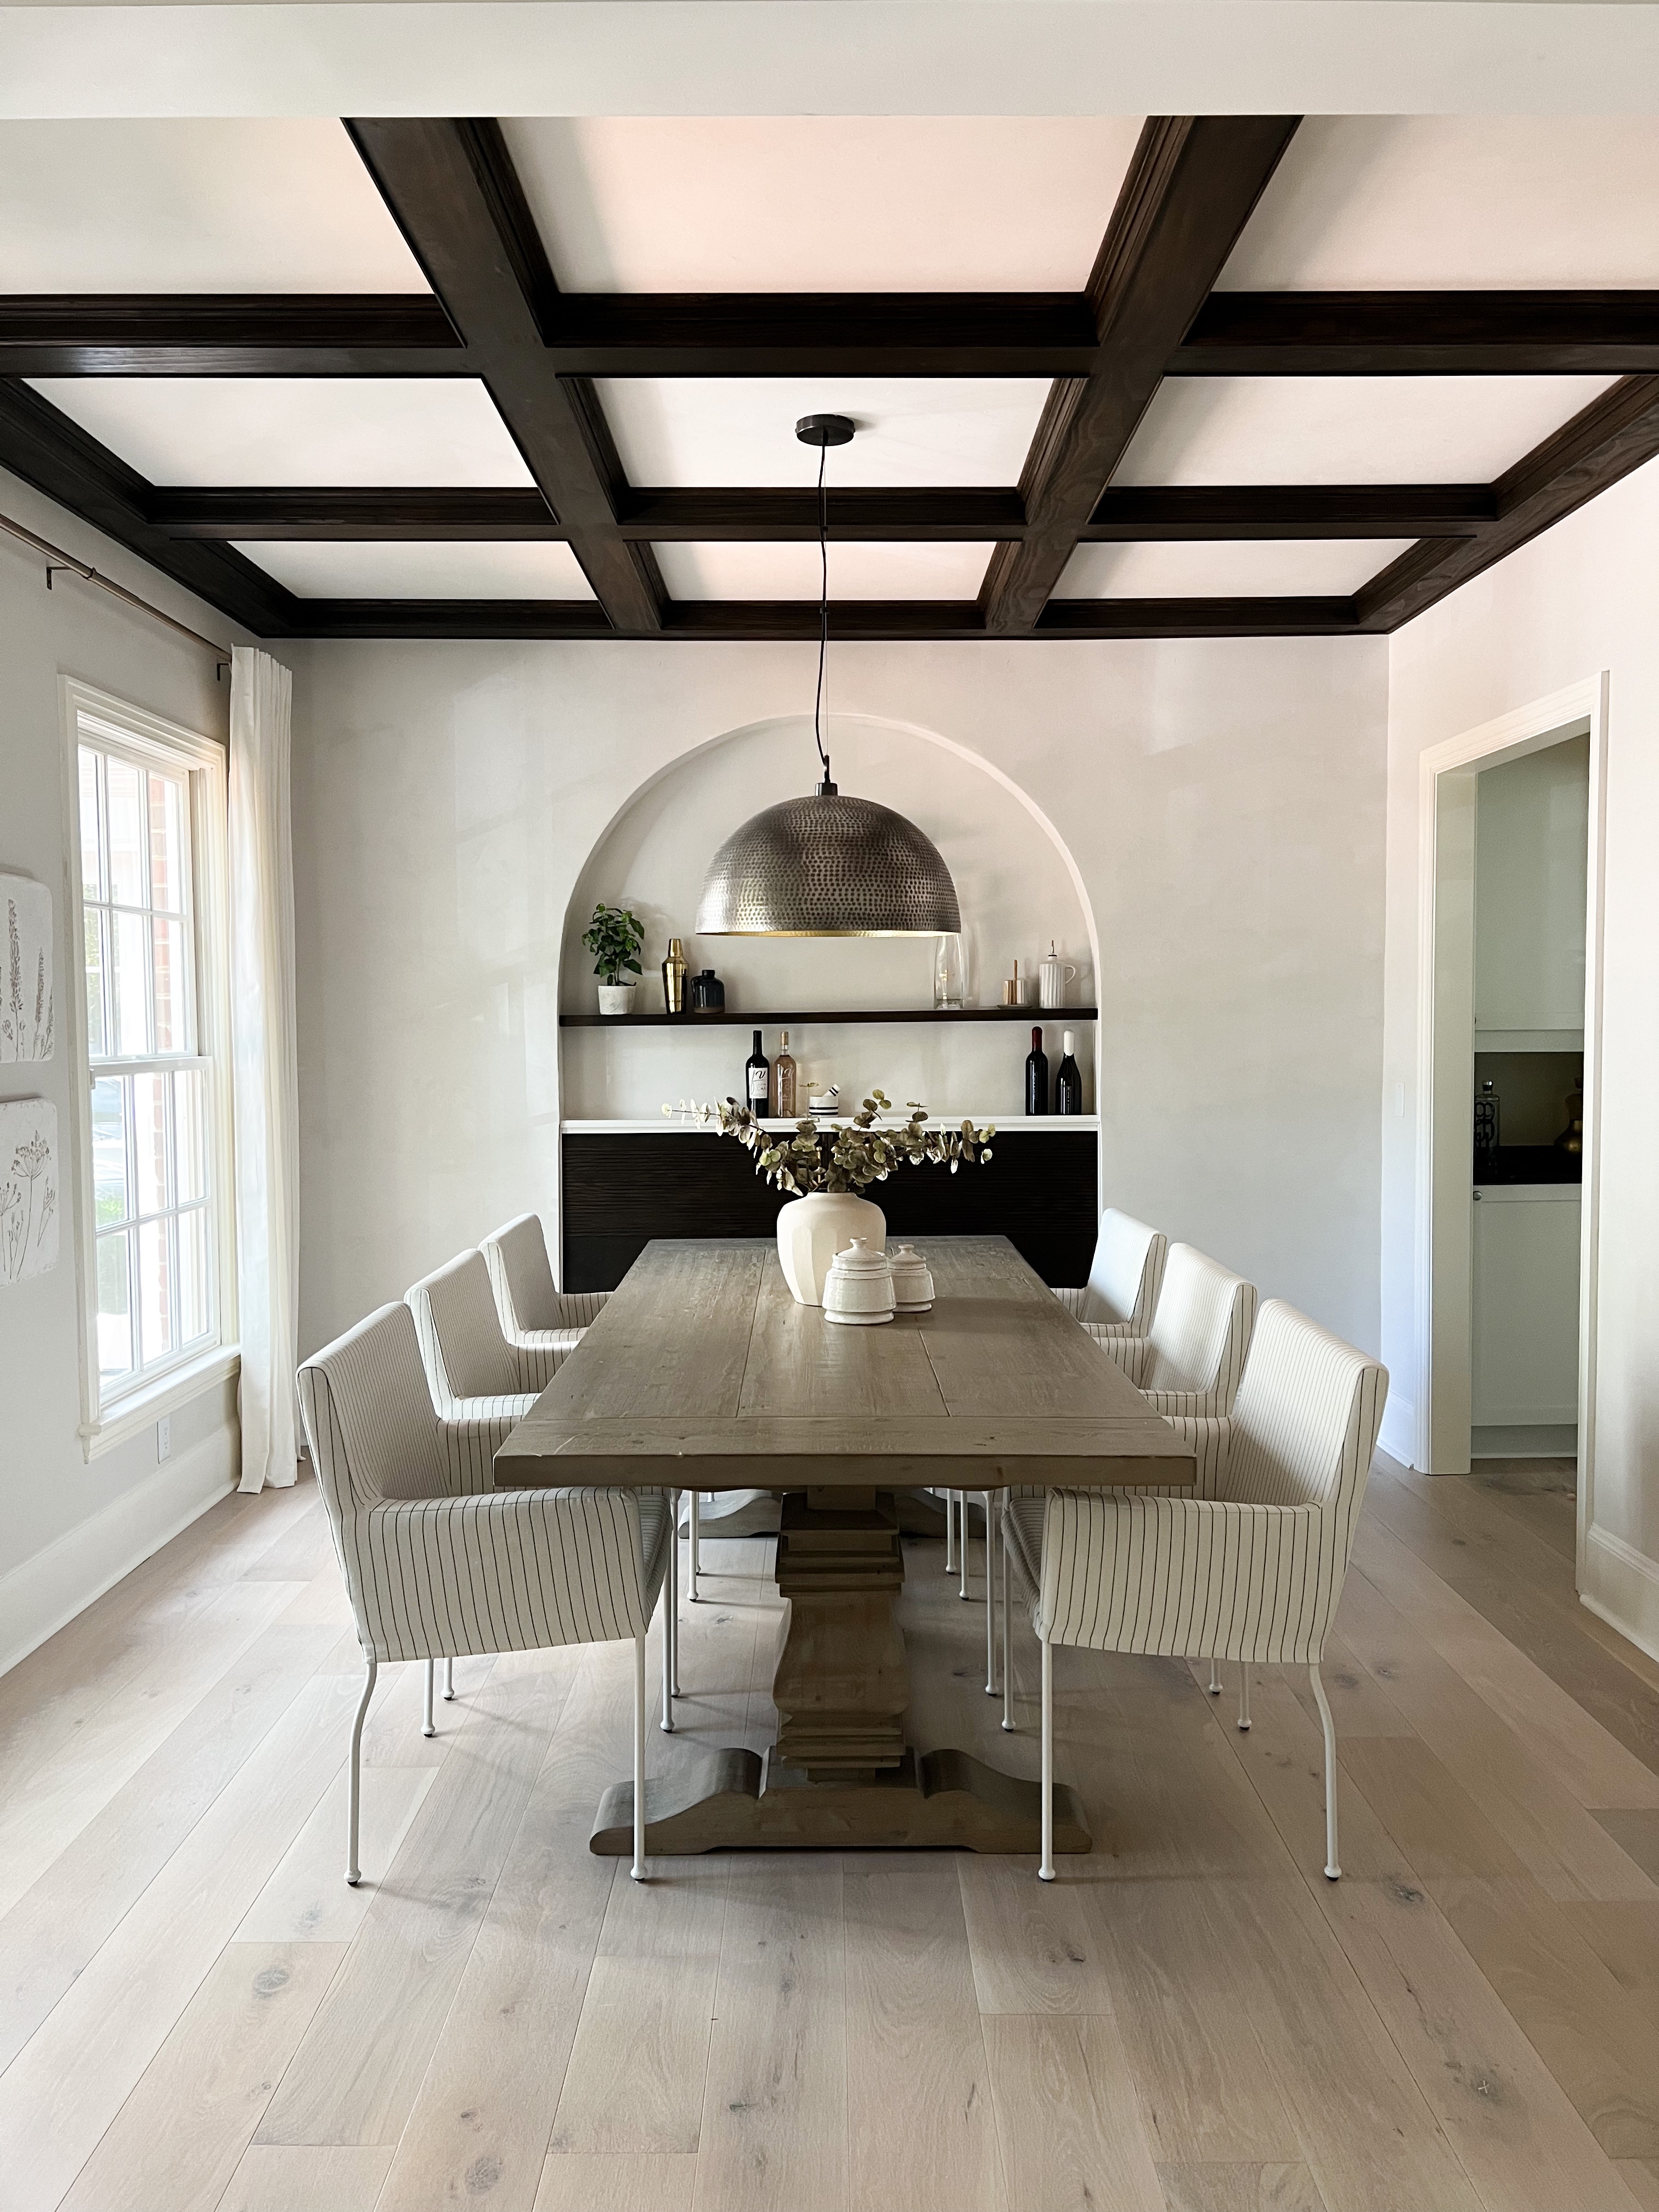 Image of a dining room with a deep wood diy coffered ceiling.